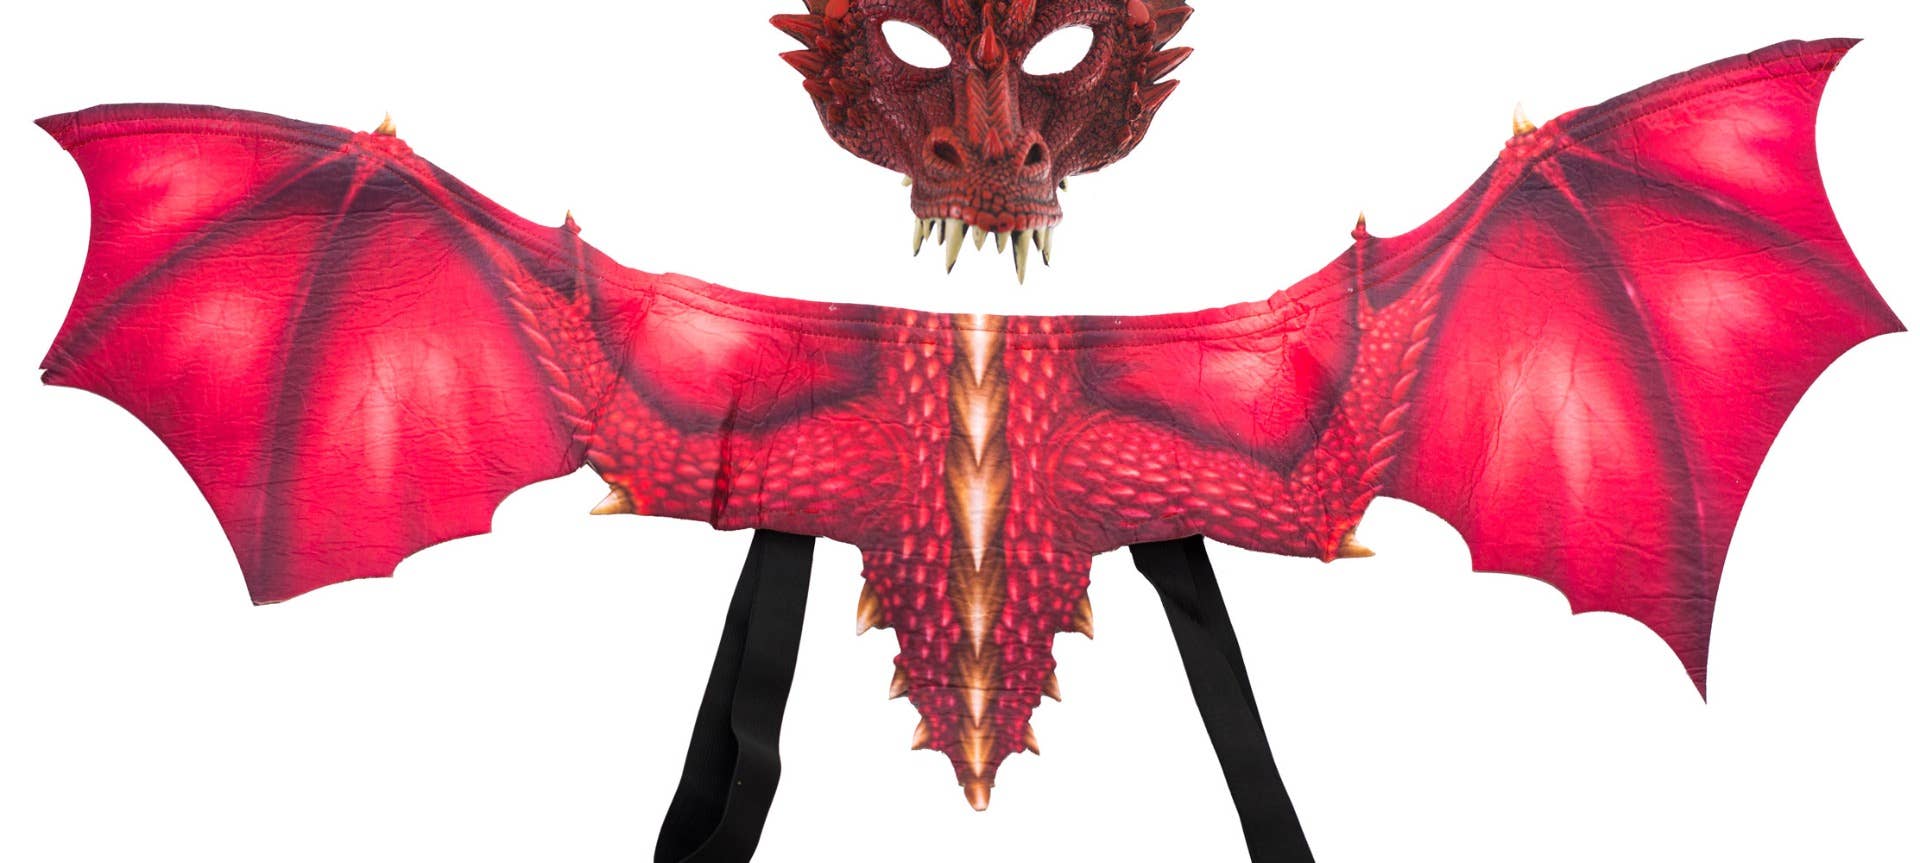 Red Dragon Kid's Halloween Foam Mask And Fabric Wings Costume Accessory Kit Close Up Wings Image